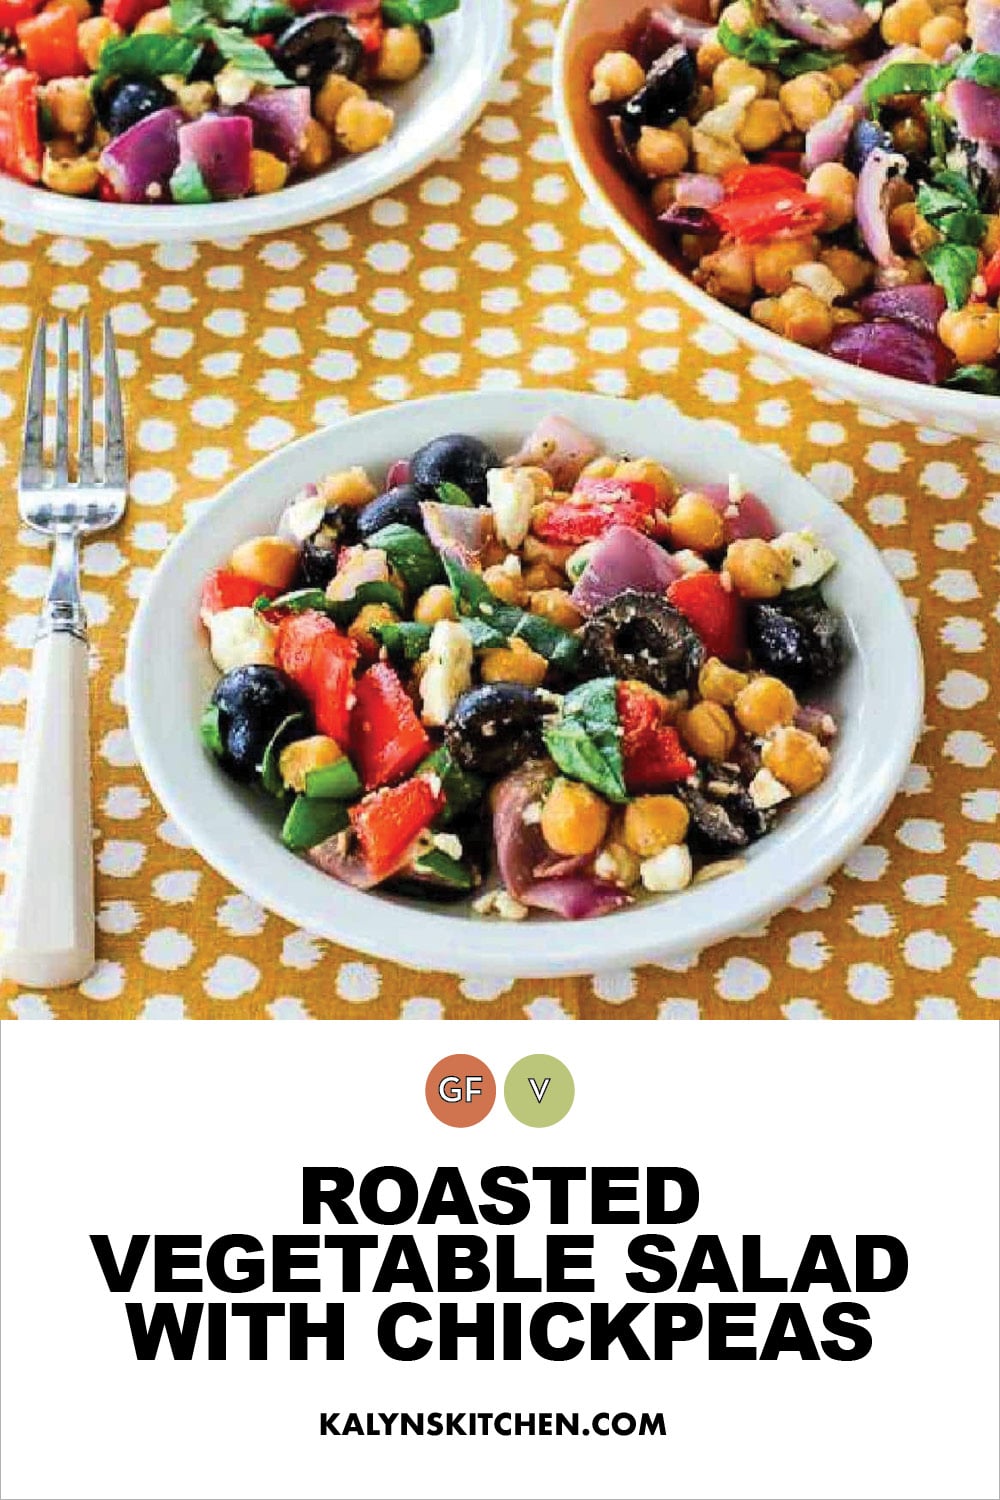 Pinterest image of Roasted Vegetable Salad with Chickpeas